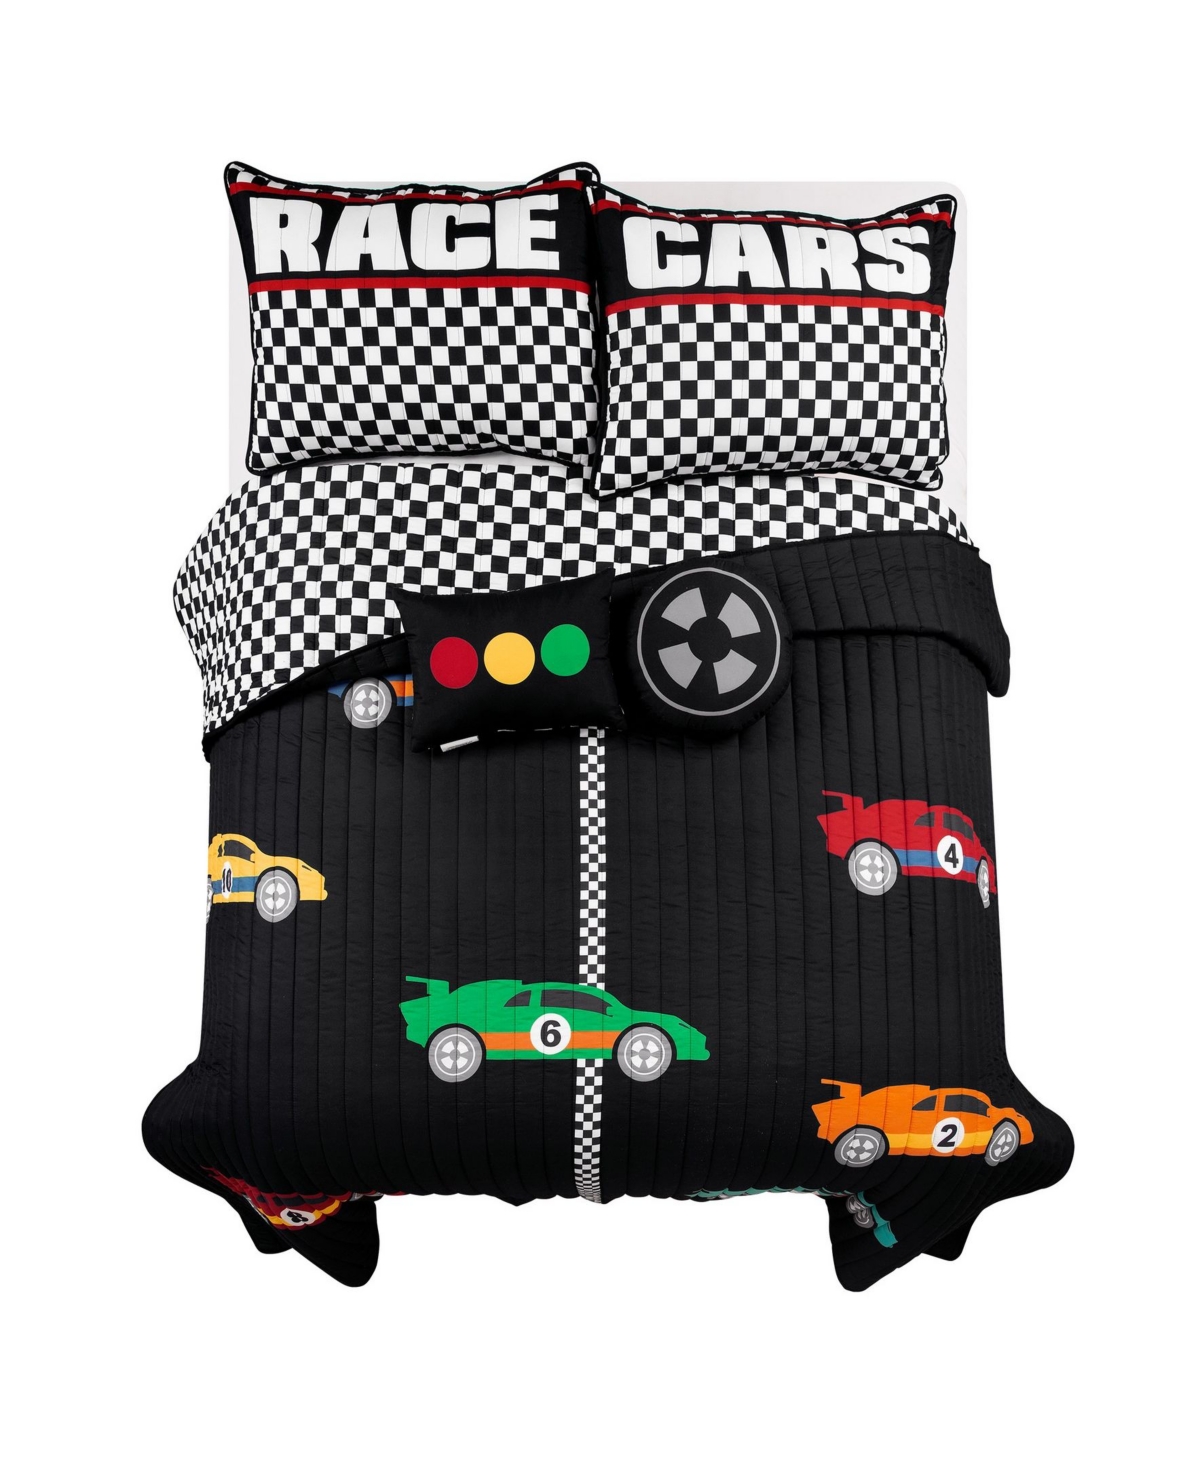 Lush Decor Racing Cars 5 Piece Quilt Set For Kids, Full/queen In Black,multi